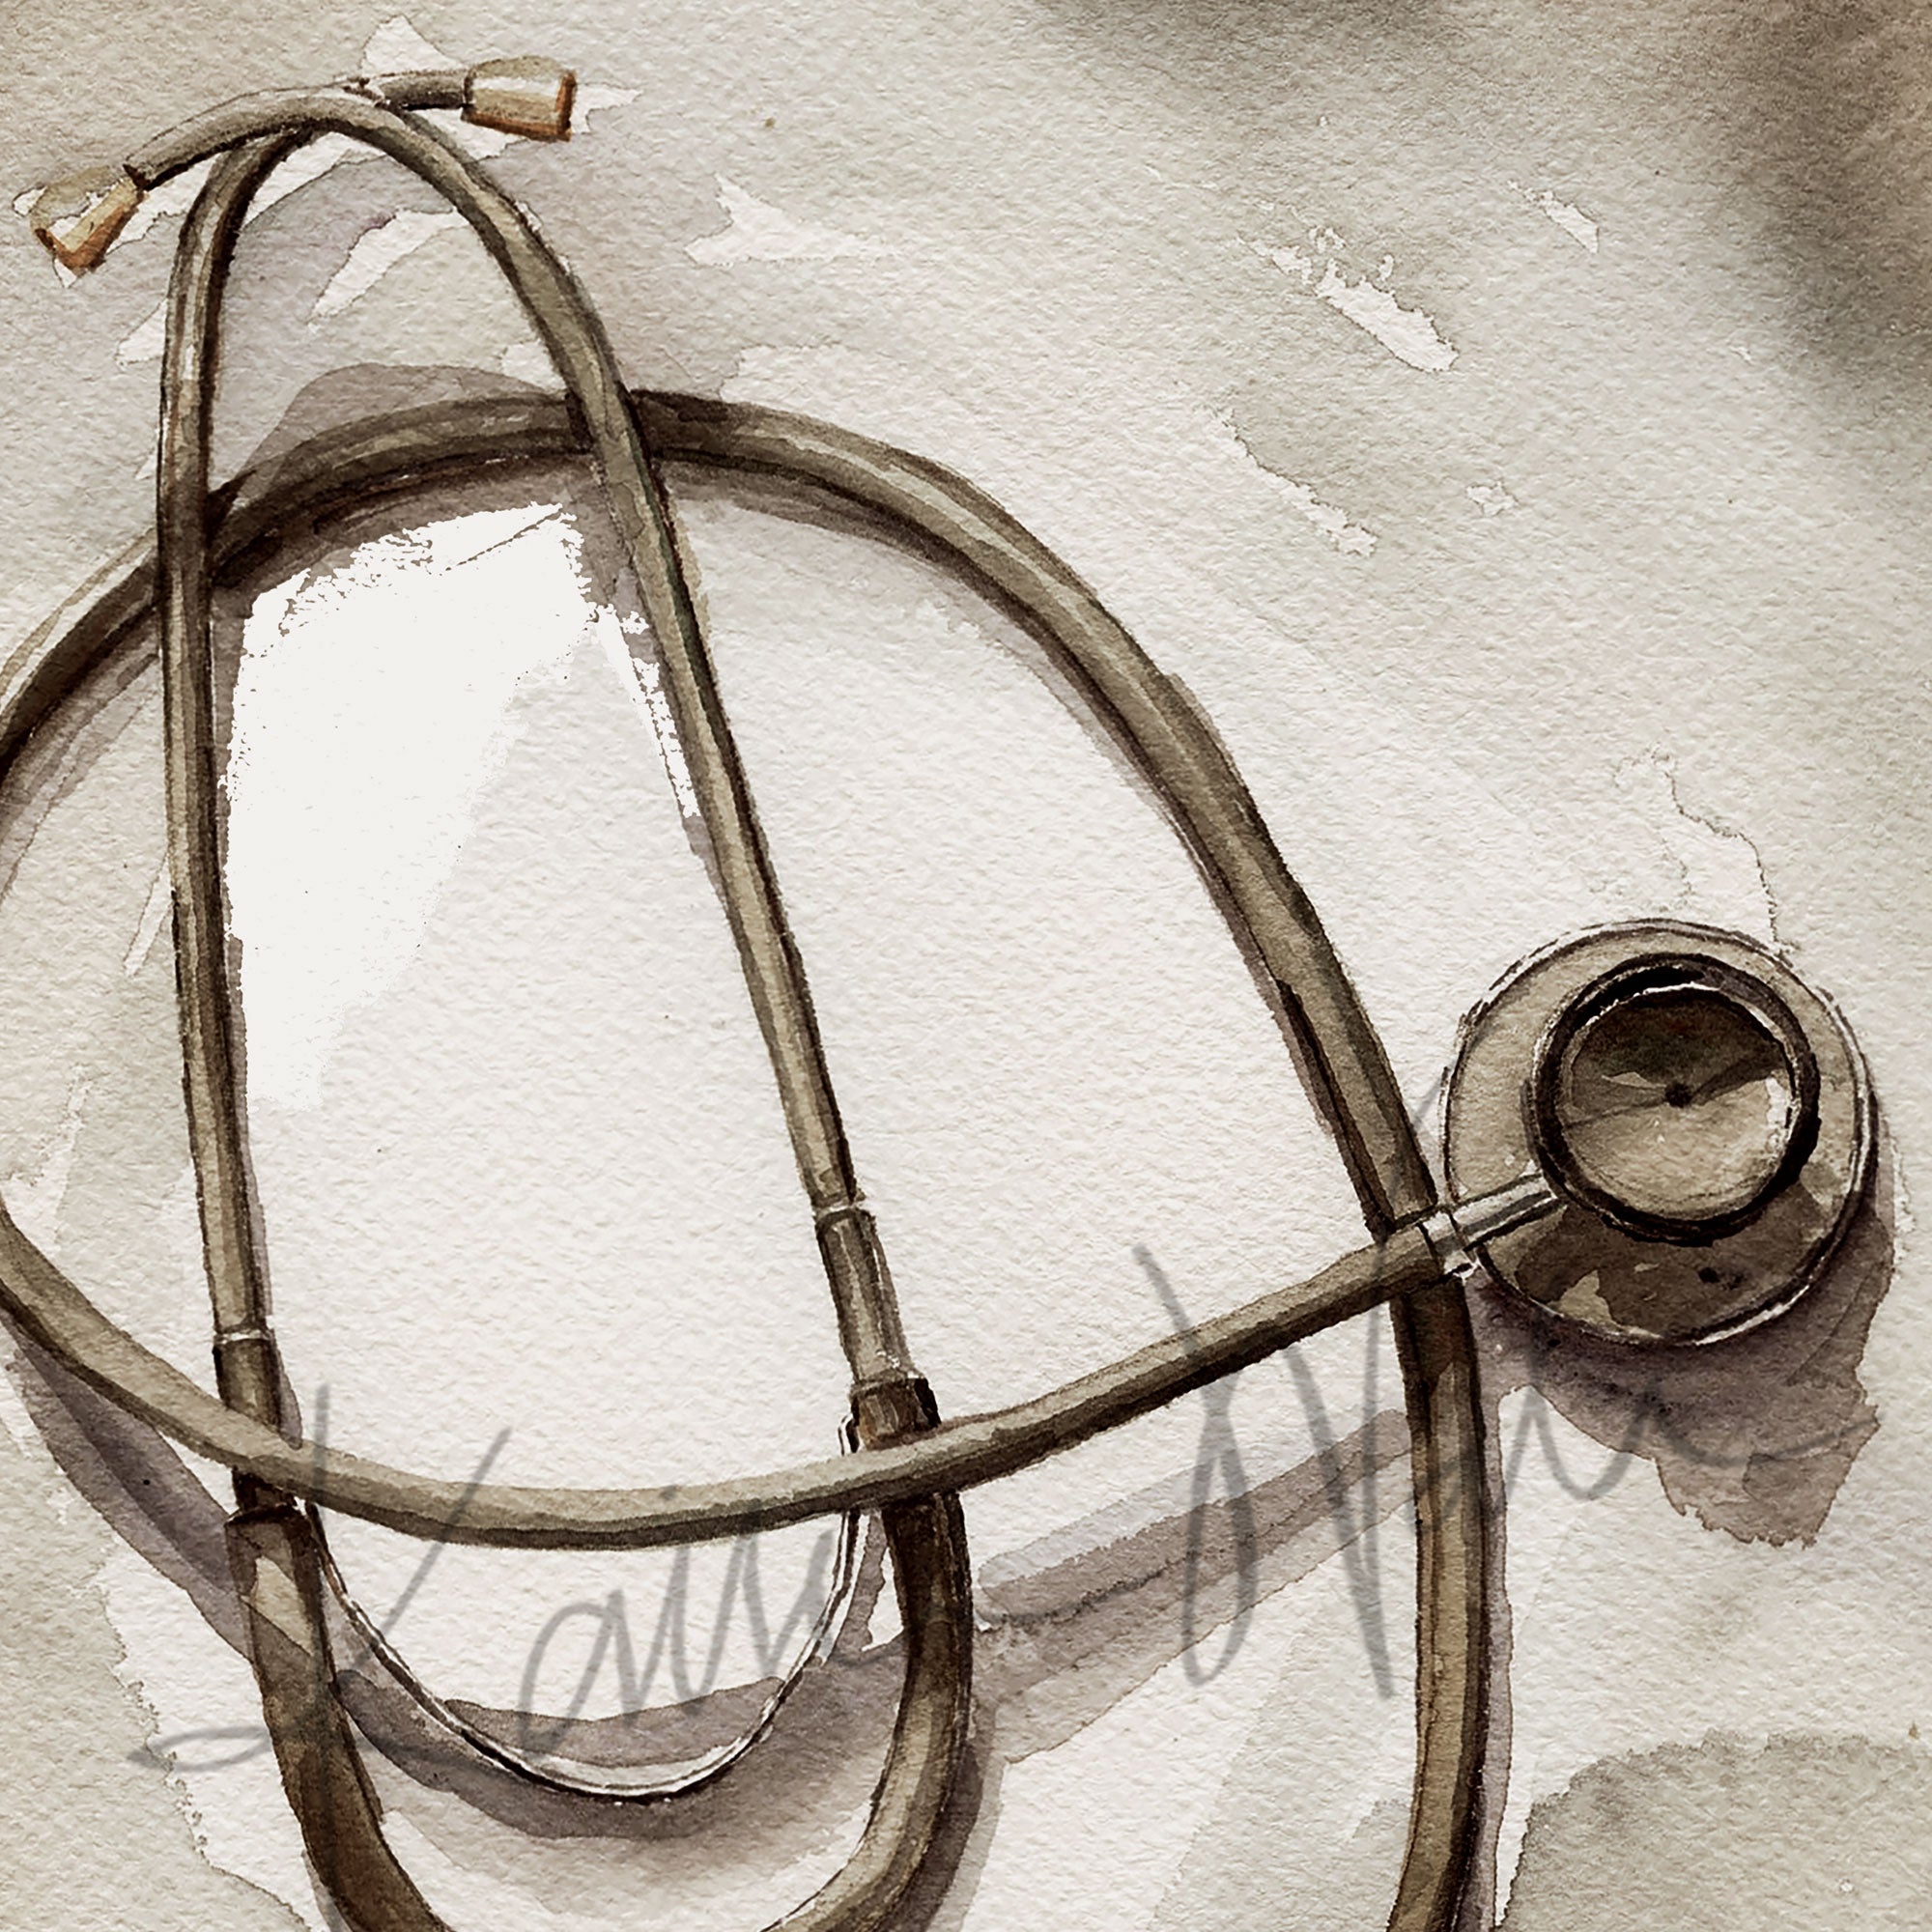 Zoomed in view of a watercolor painting of a Littmann stethoscope in an antique style.